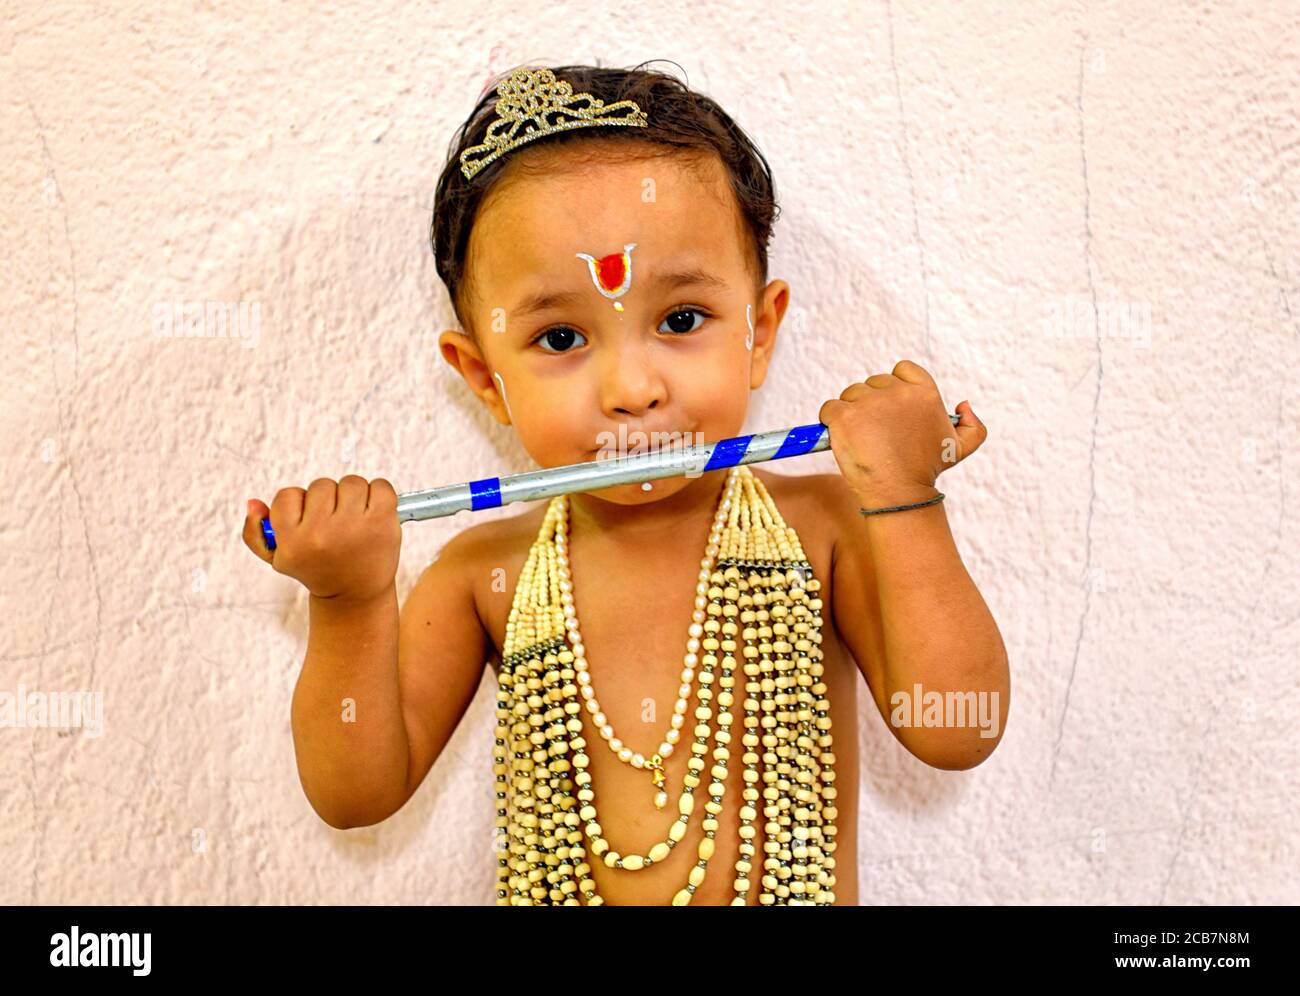 Kolkata, India. 11th Aug, 2020. A little kid dressed up as Lord ...